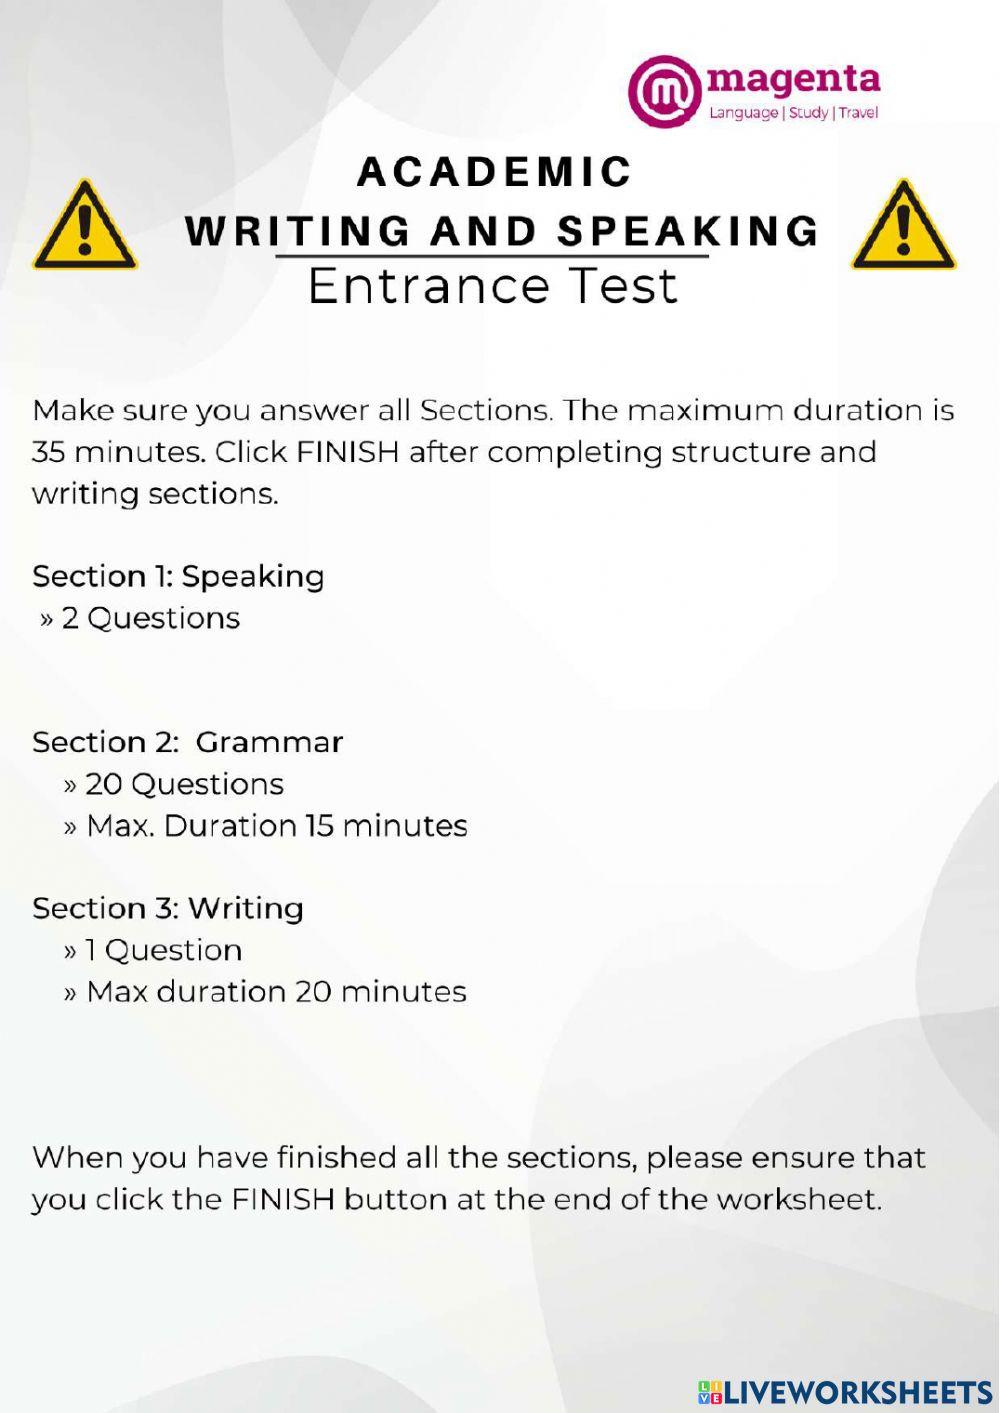 Academic Writing and Speaking Entrance Test